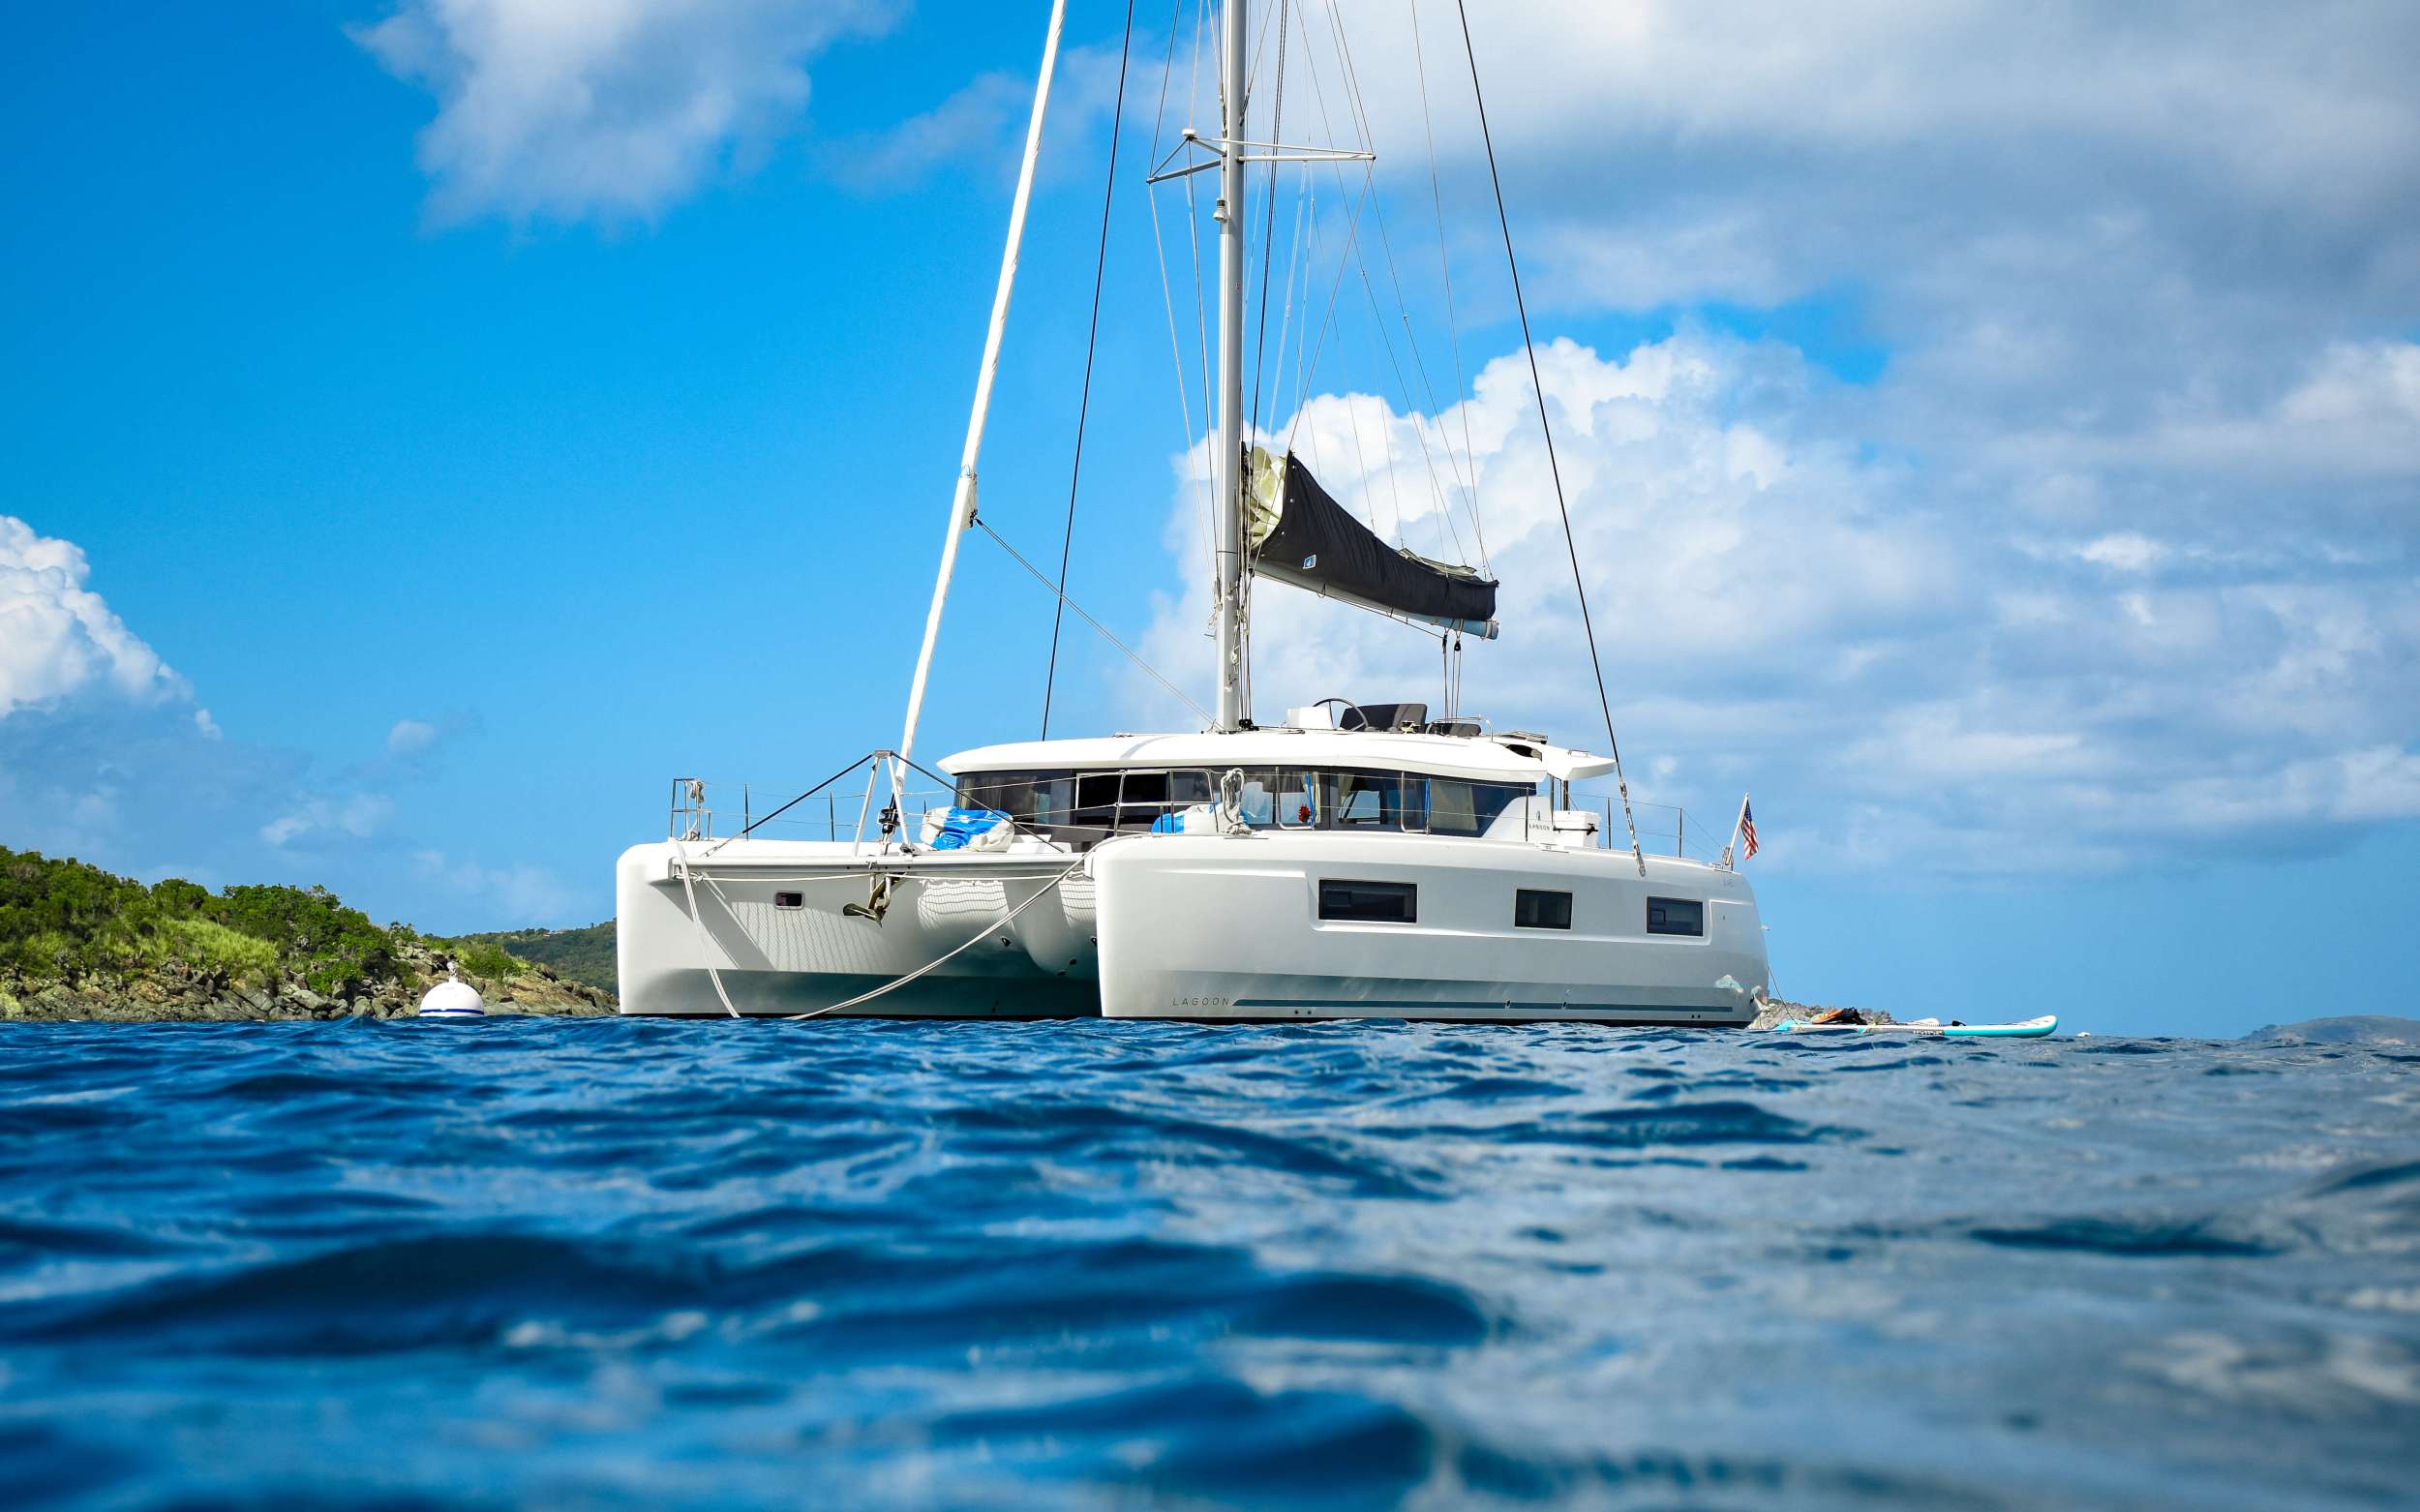 CELAVIE - Yacht Charter St Vincent & Boat hire in Caribbean 2